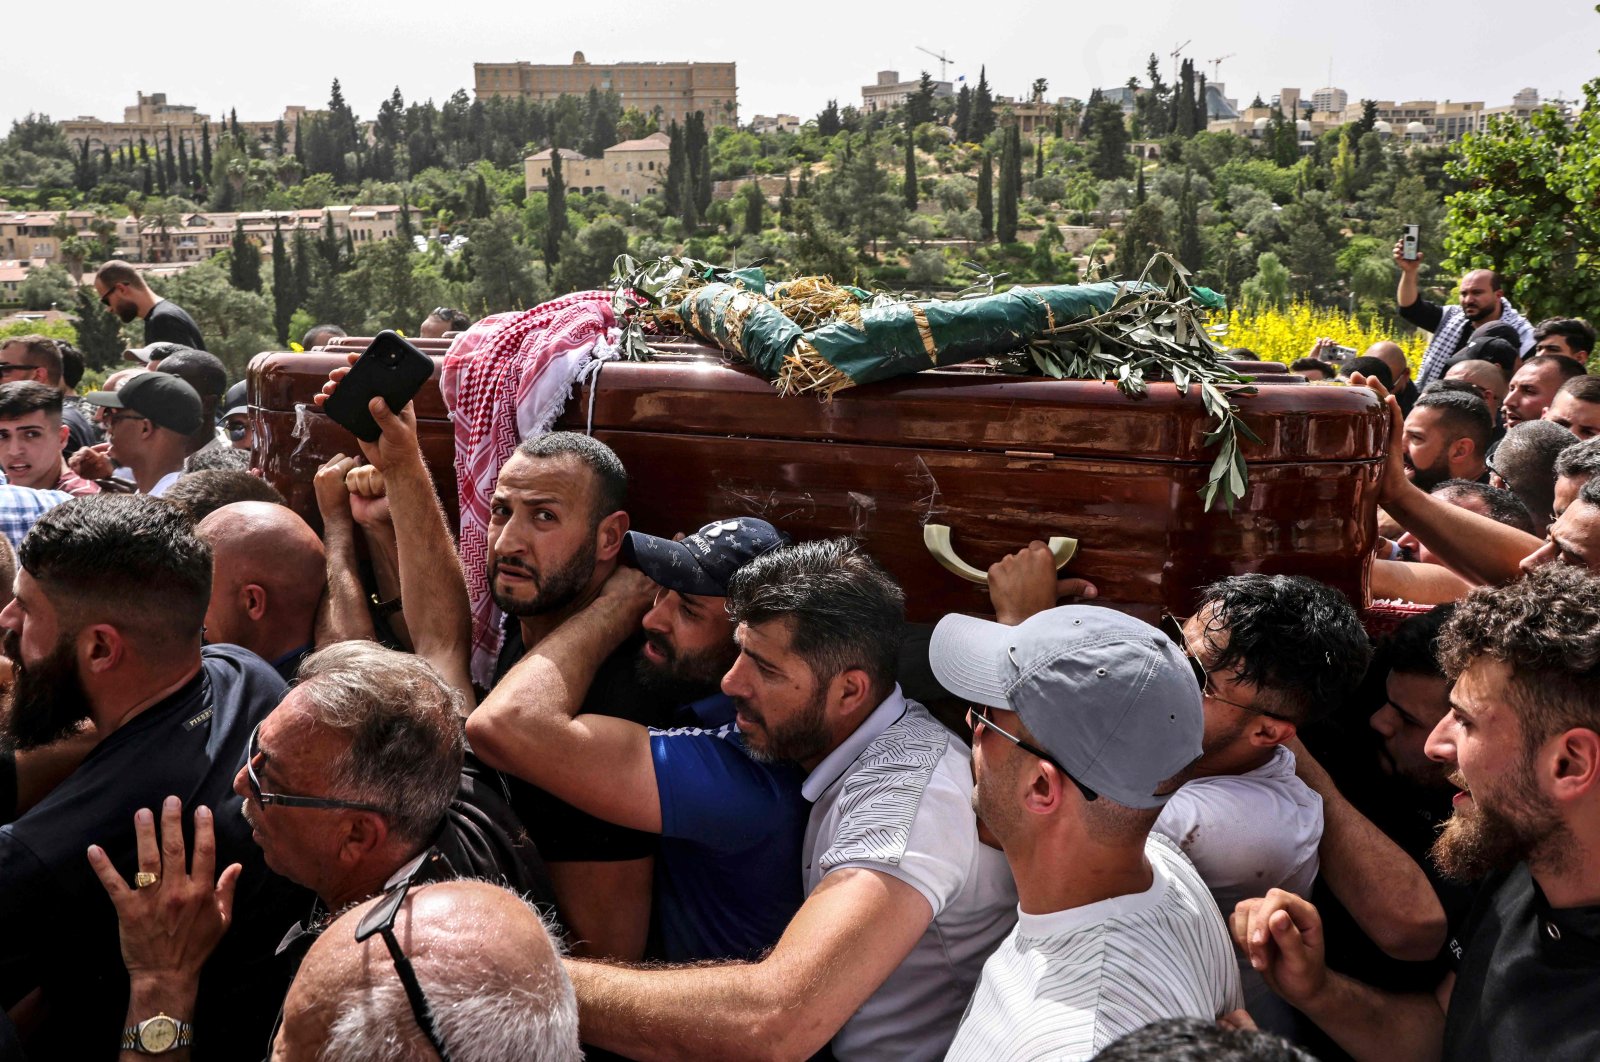 Palestinian mourners carry the coffin of slain Al-Jazeera journalist Shireen Abu Akleh towards the Mount Zion cemetery following a church service in Jerusalem on May 13, 2022. (AFP Photo)